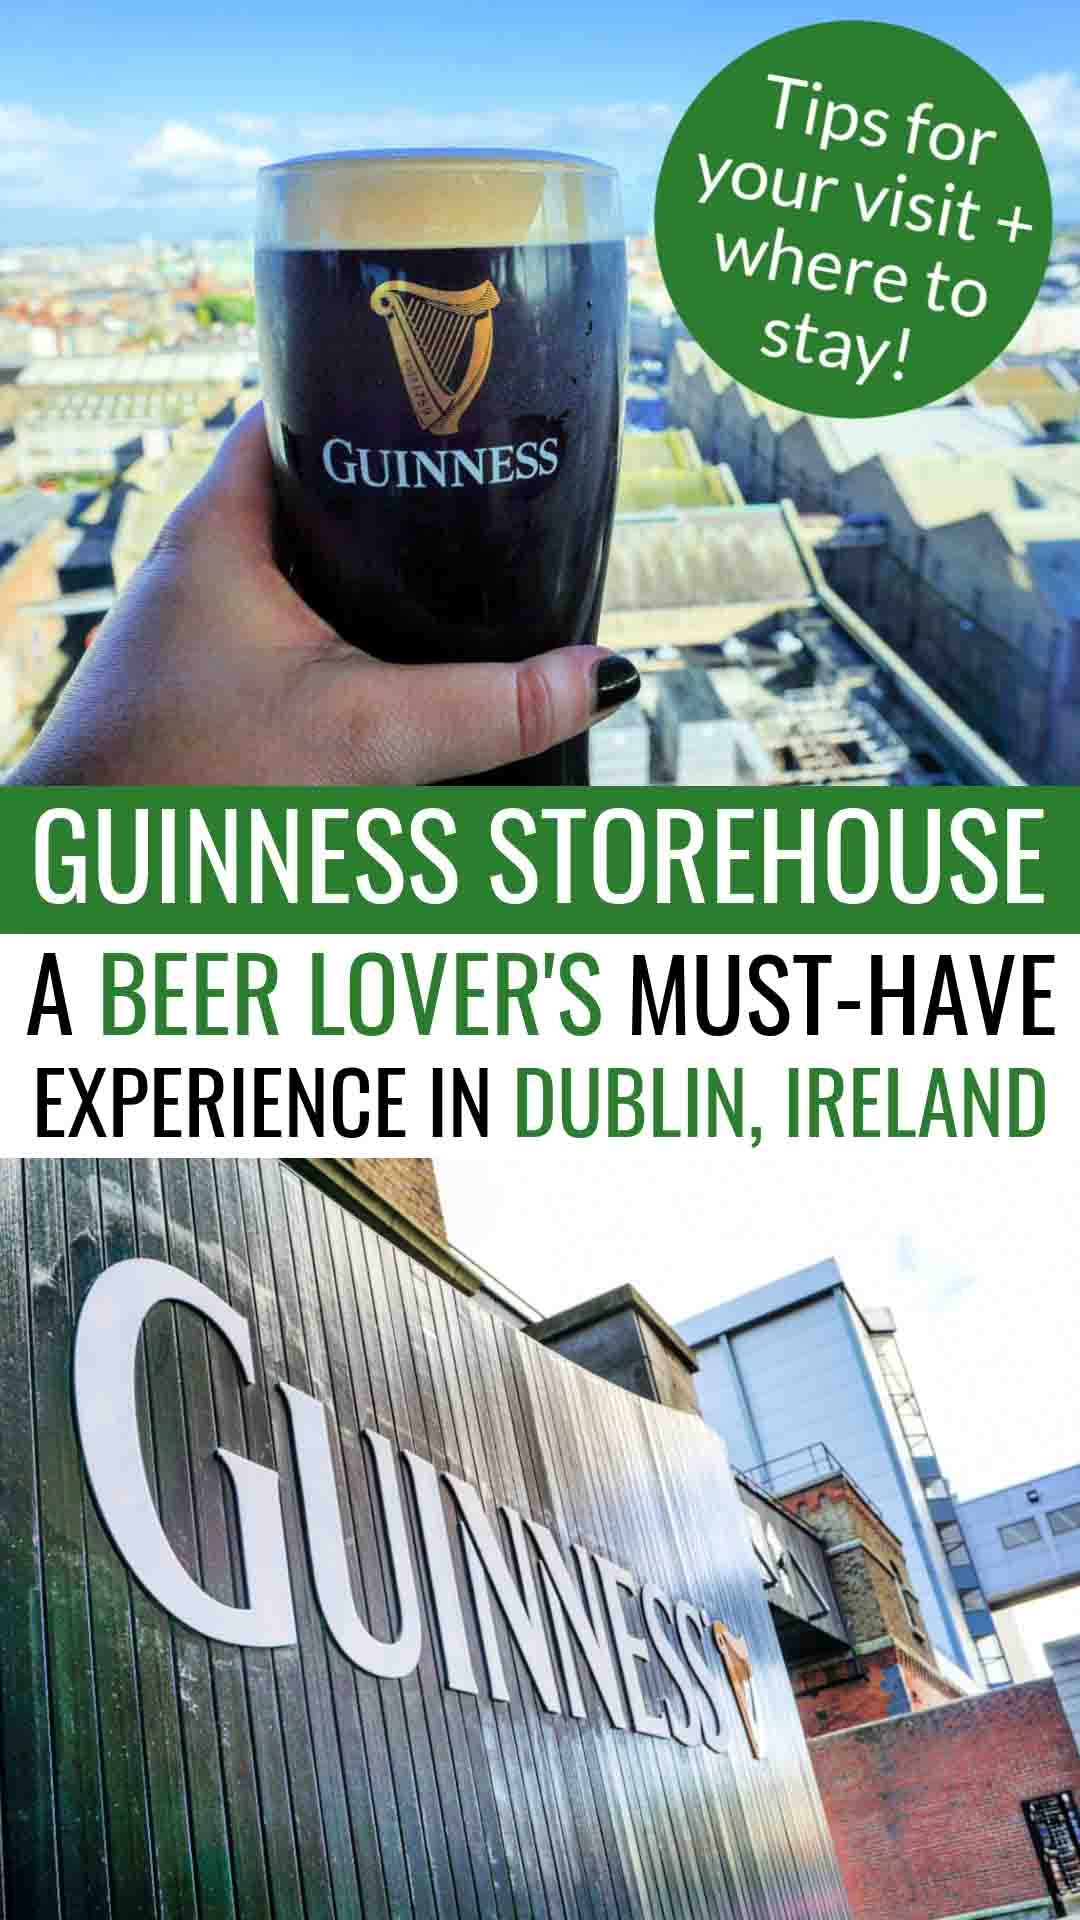 Guinness Storehouse: A Beer Lover's Must-Have Experience in Dublin, Ireland